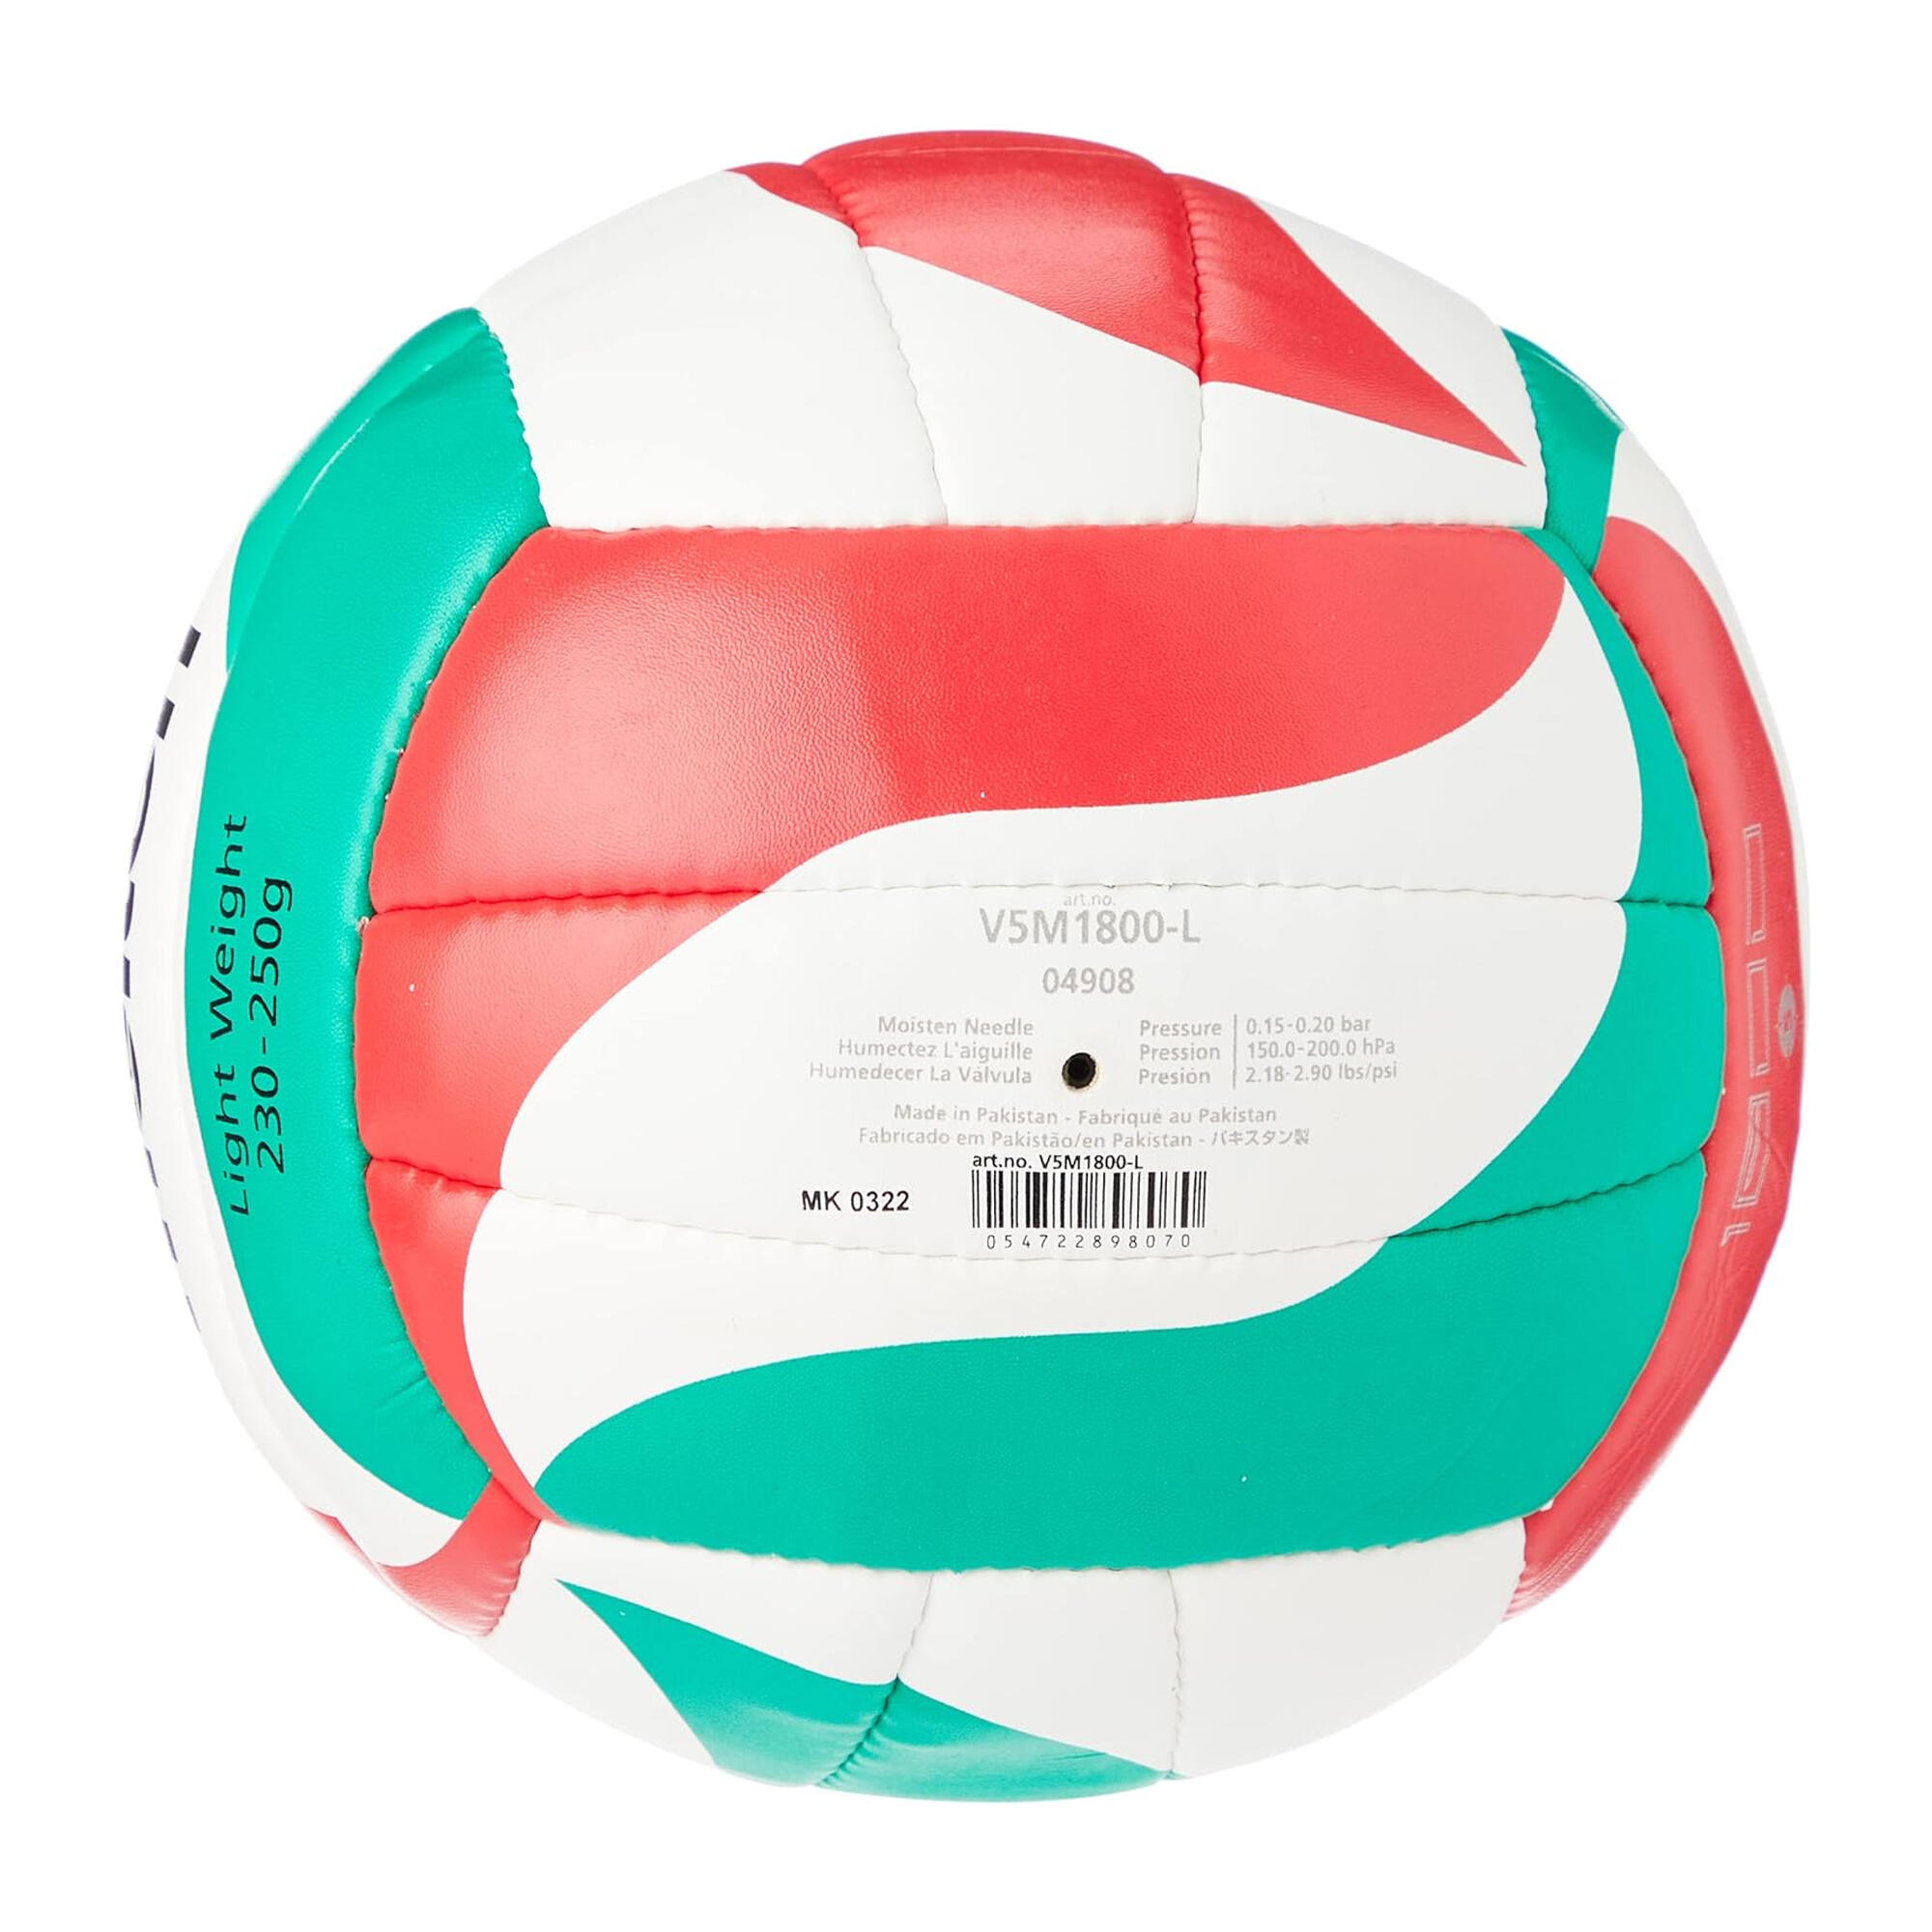 V5M1800L Volleyball (White/Green/Red) 2/3